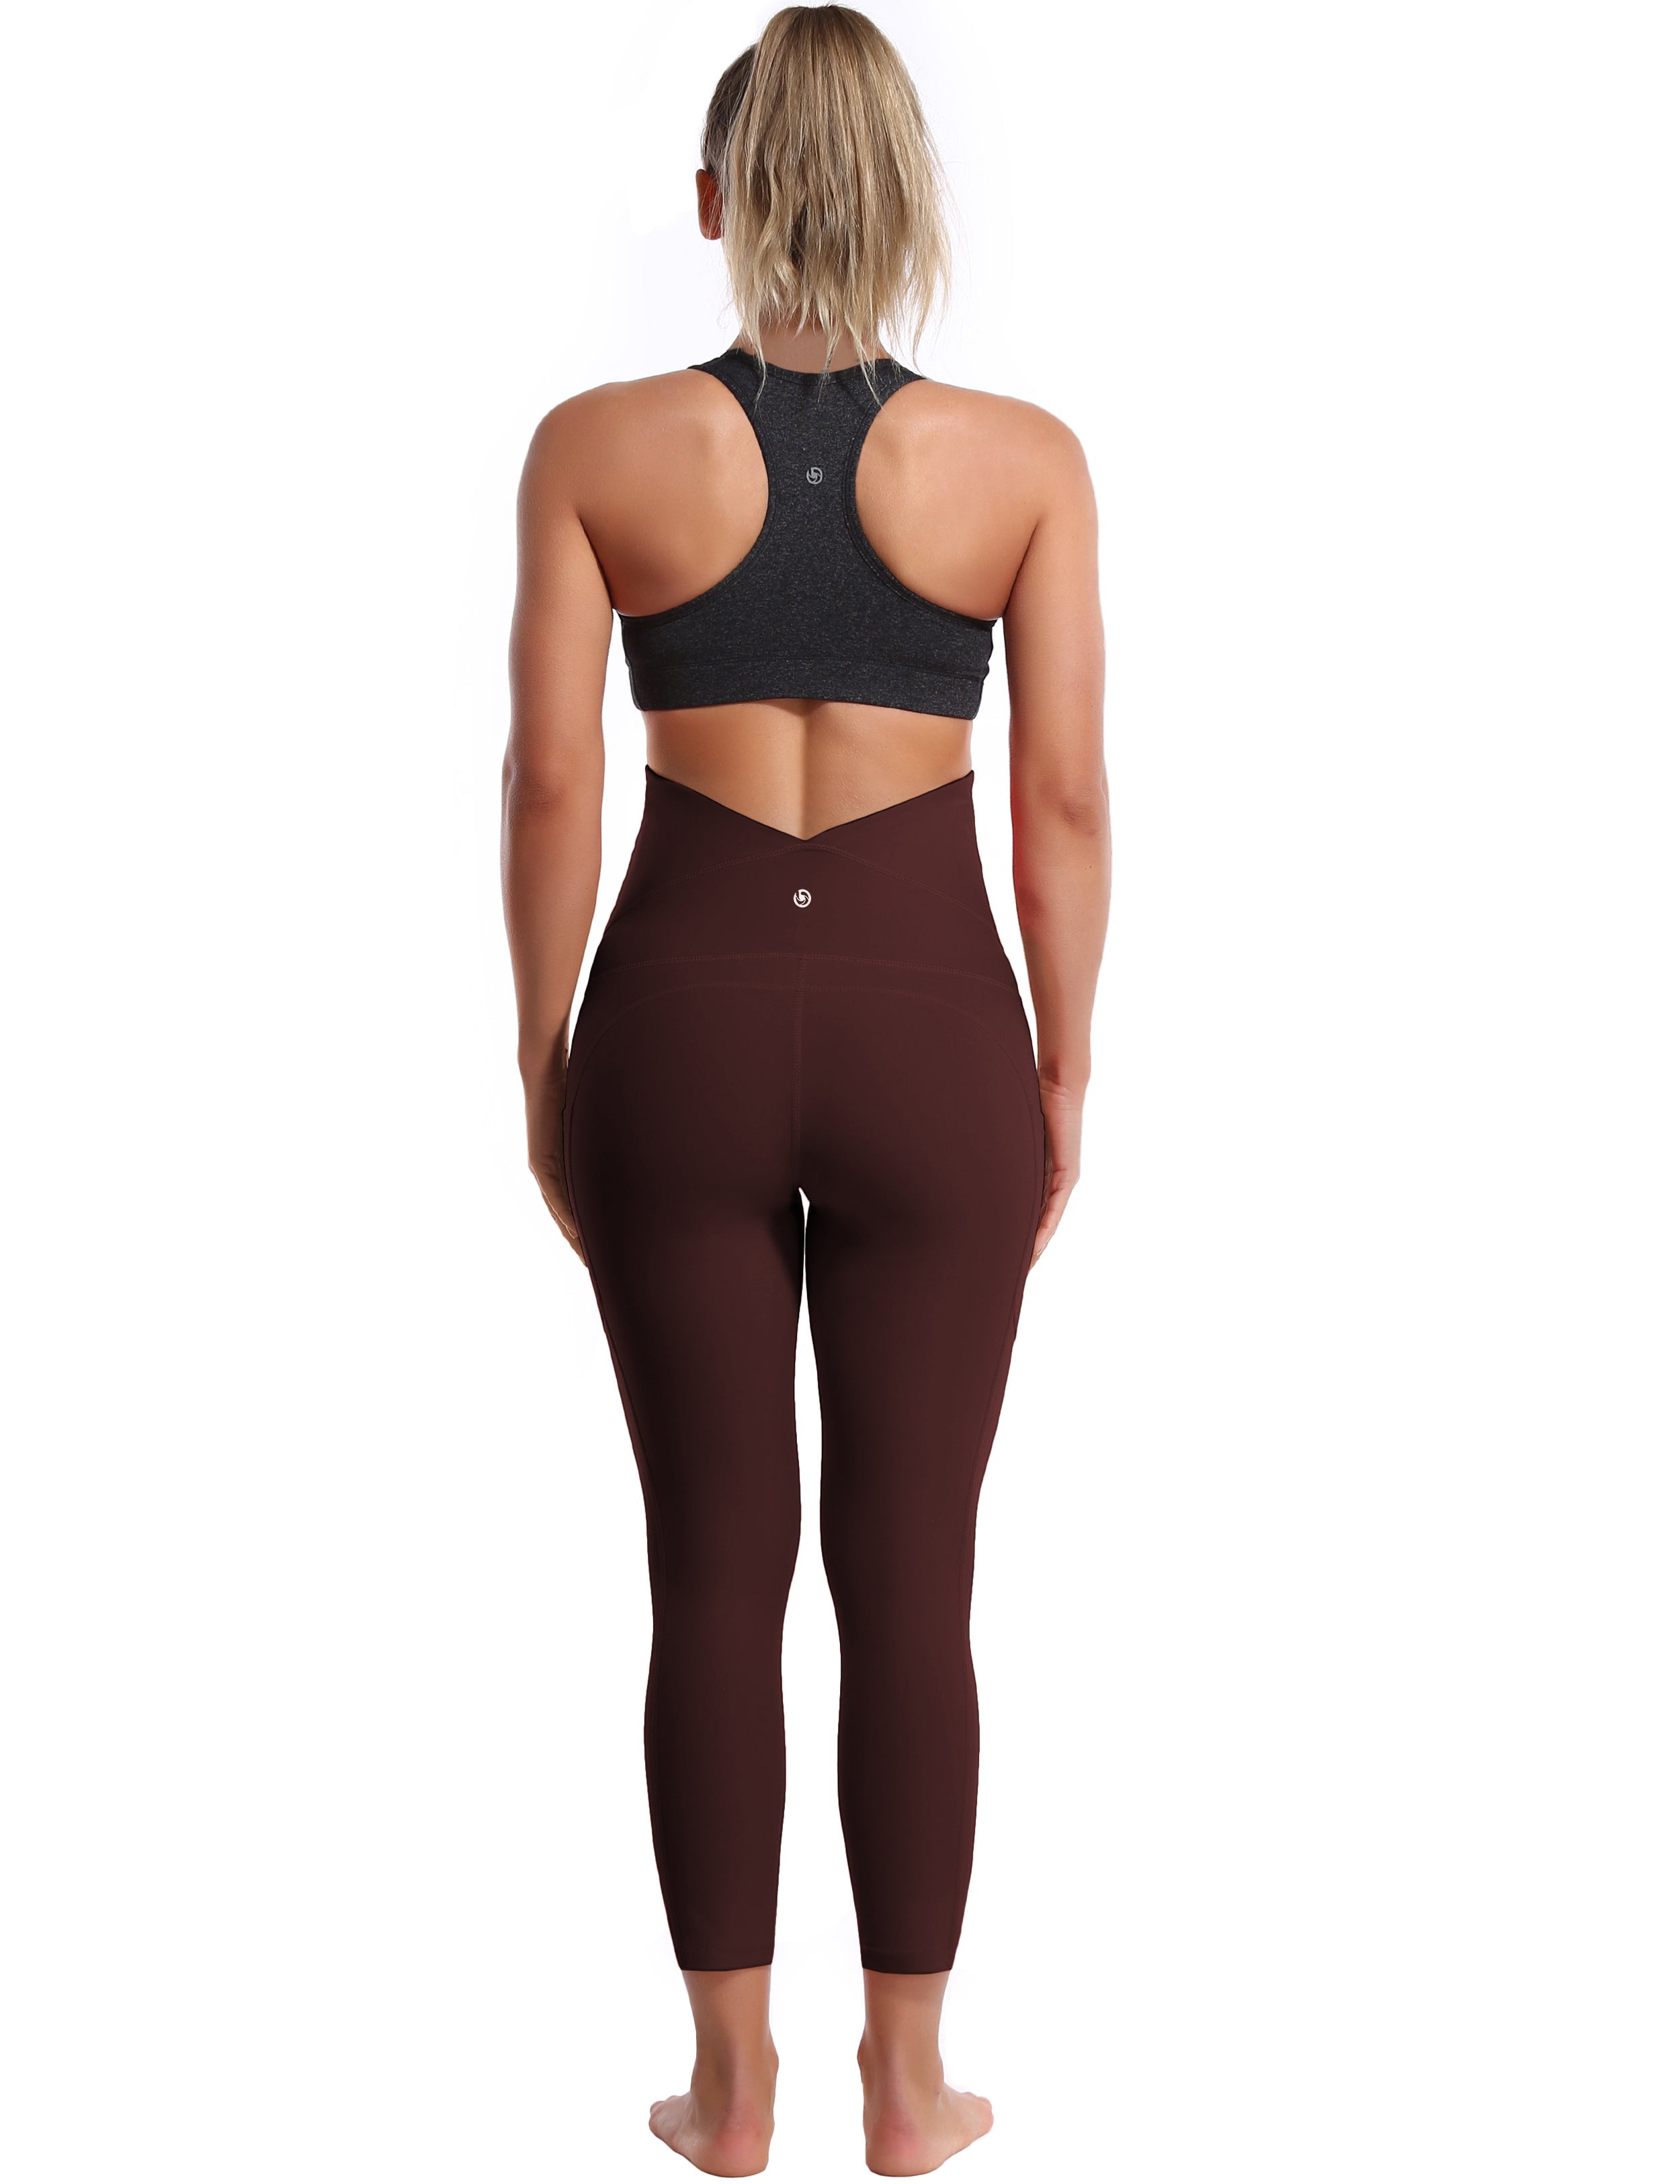 22" Side Pockets Maternity Jogging Pants mahoganymaroon 87%Nylon/13%Spandex Softest-ever fabric High elasticity 4-way stretch Fabric doesn't attract lint easily No see-through Moisture-wicking Machine wash